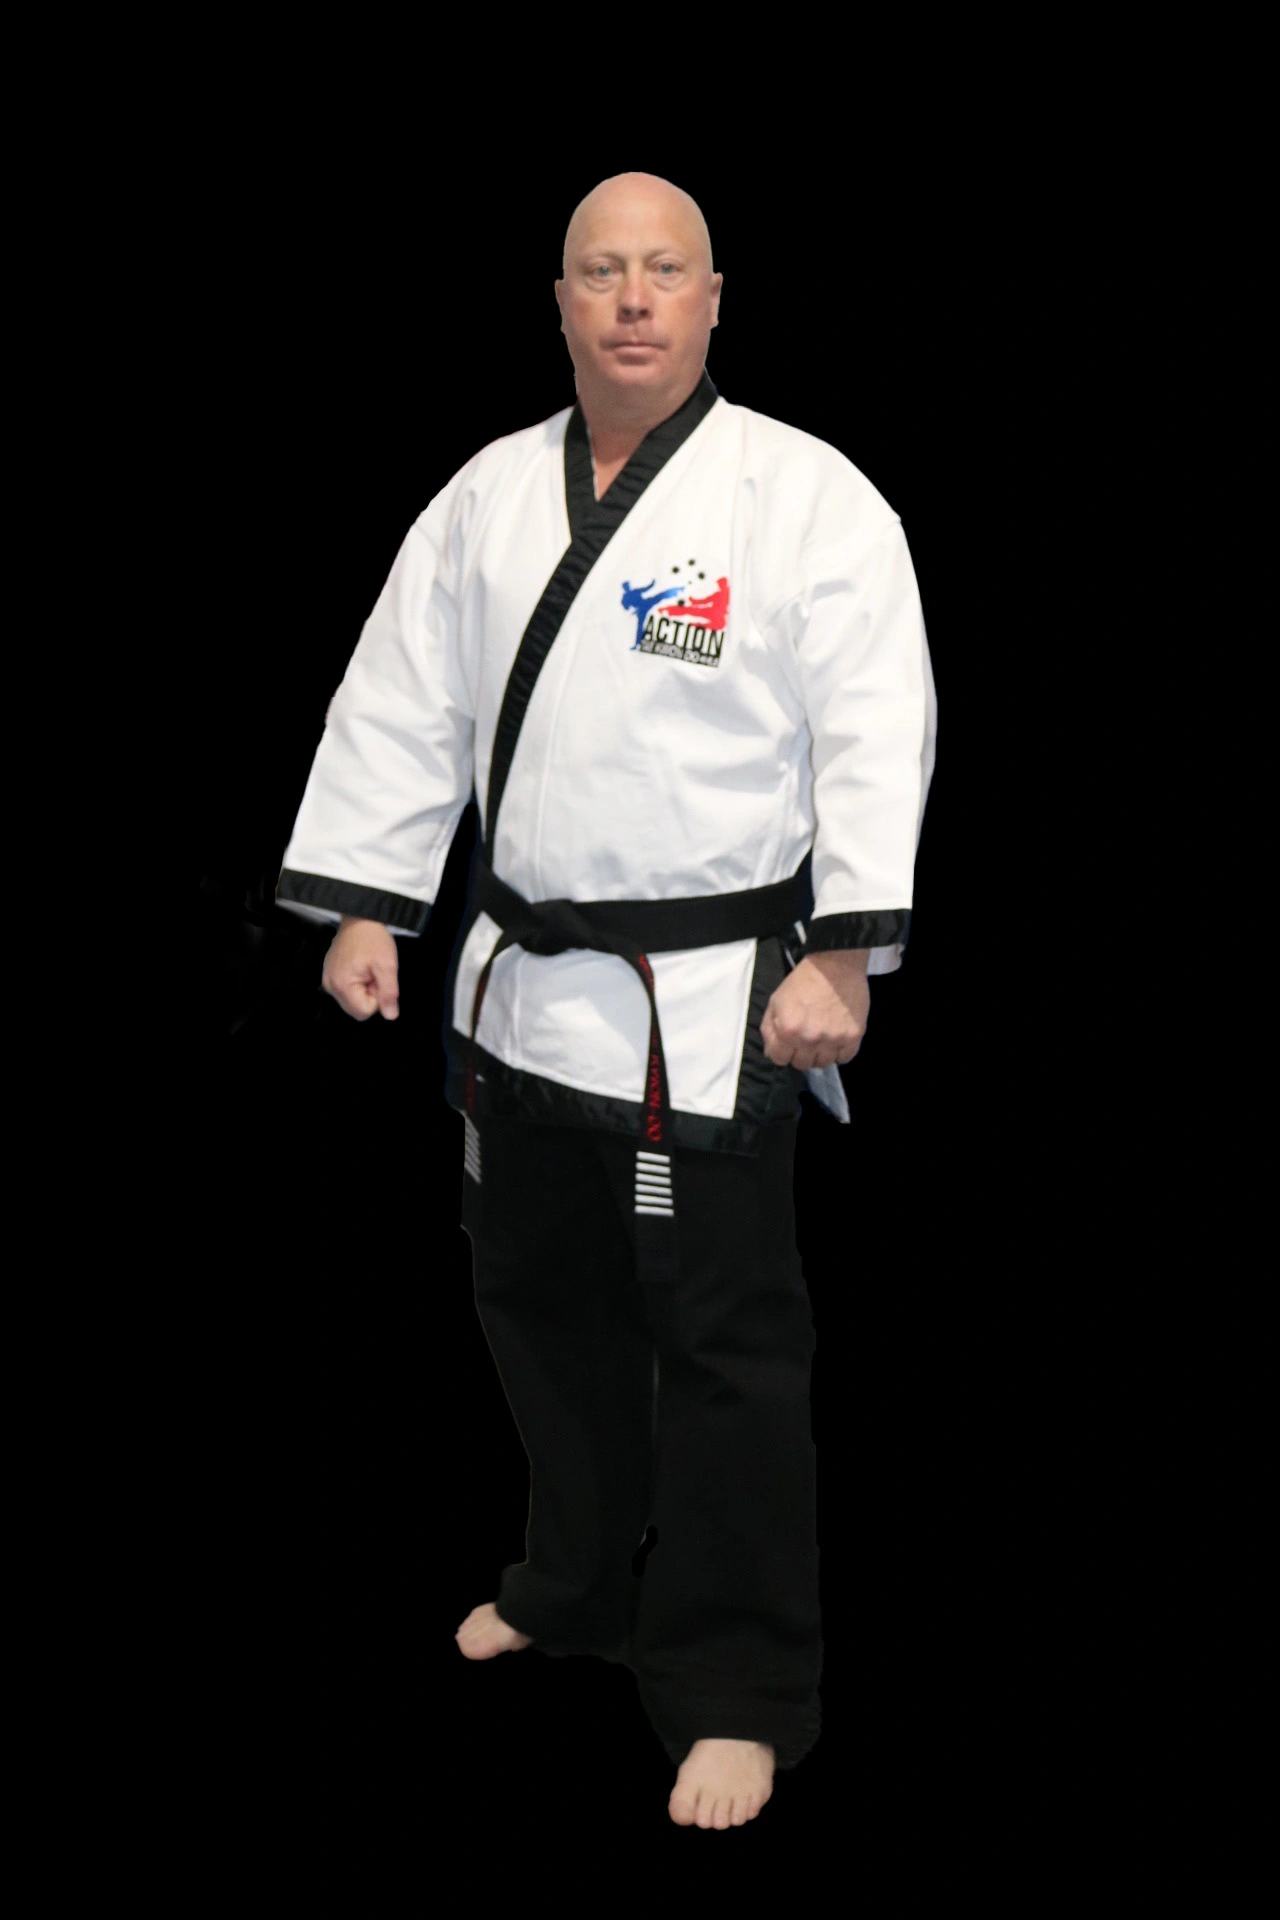 Instructor Ian Donnelly